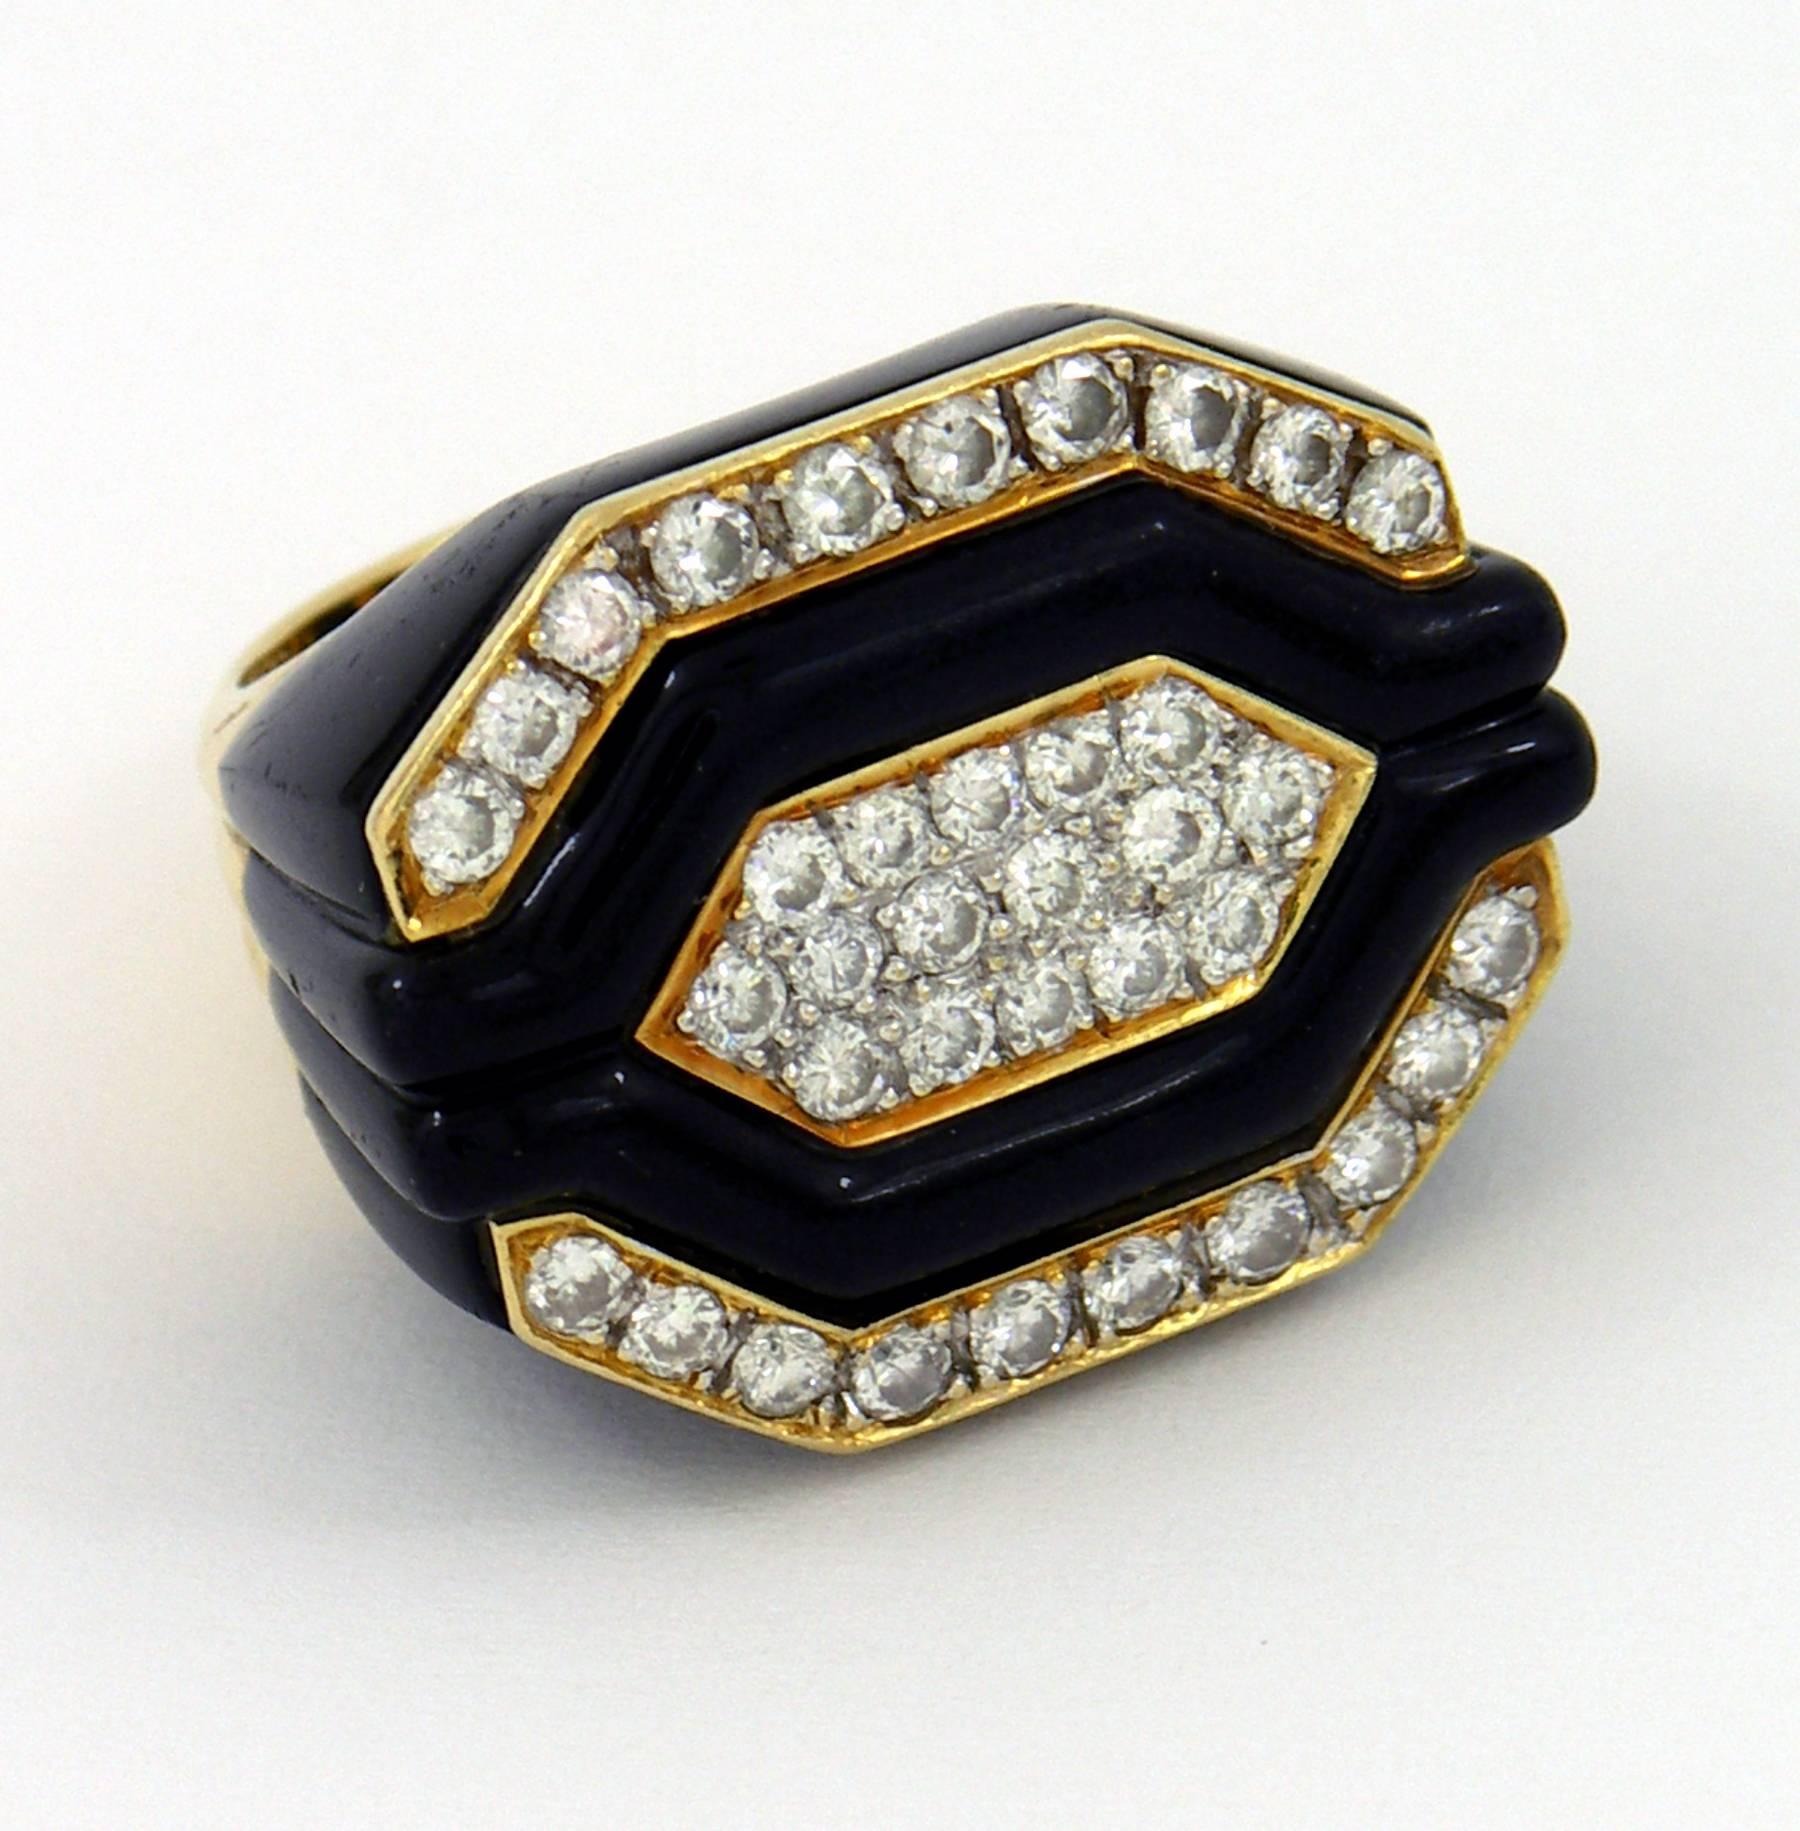 An 18K yellow gold ring centered on a hexagonal section of pave set diamonds, accented with onyx strips bordered by additional pave set diamonds for a total approximate weight of 1.75ct. The shoulders of the ring feature fluting in the onyx, which